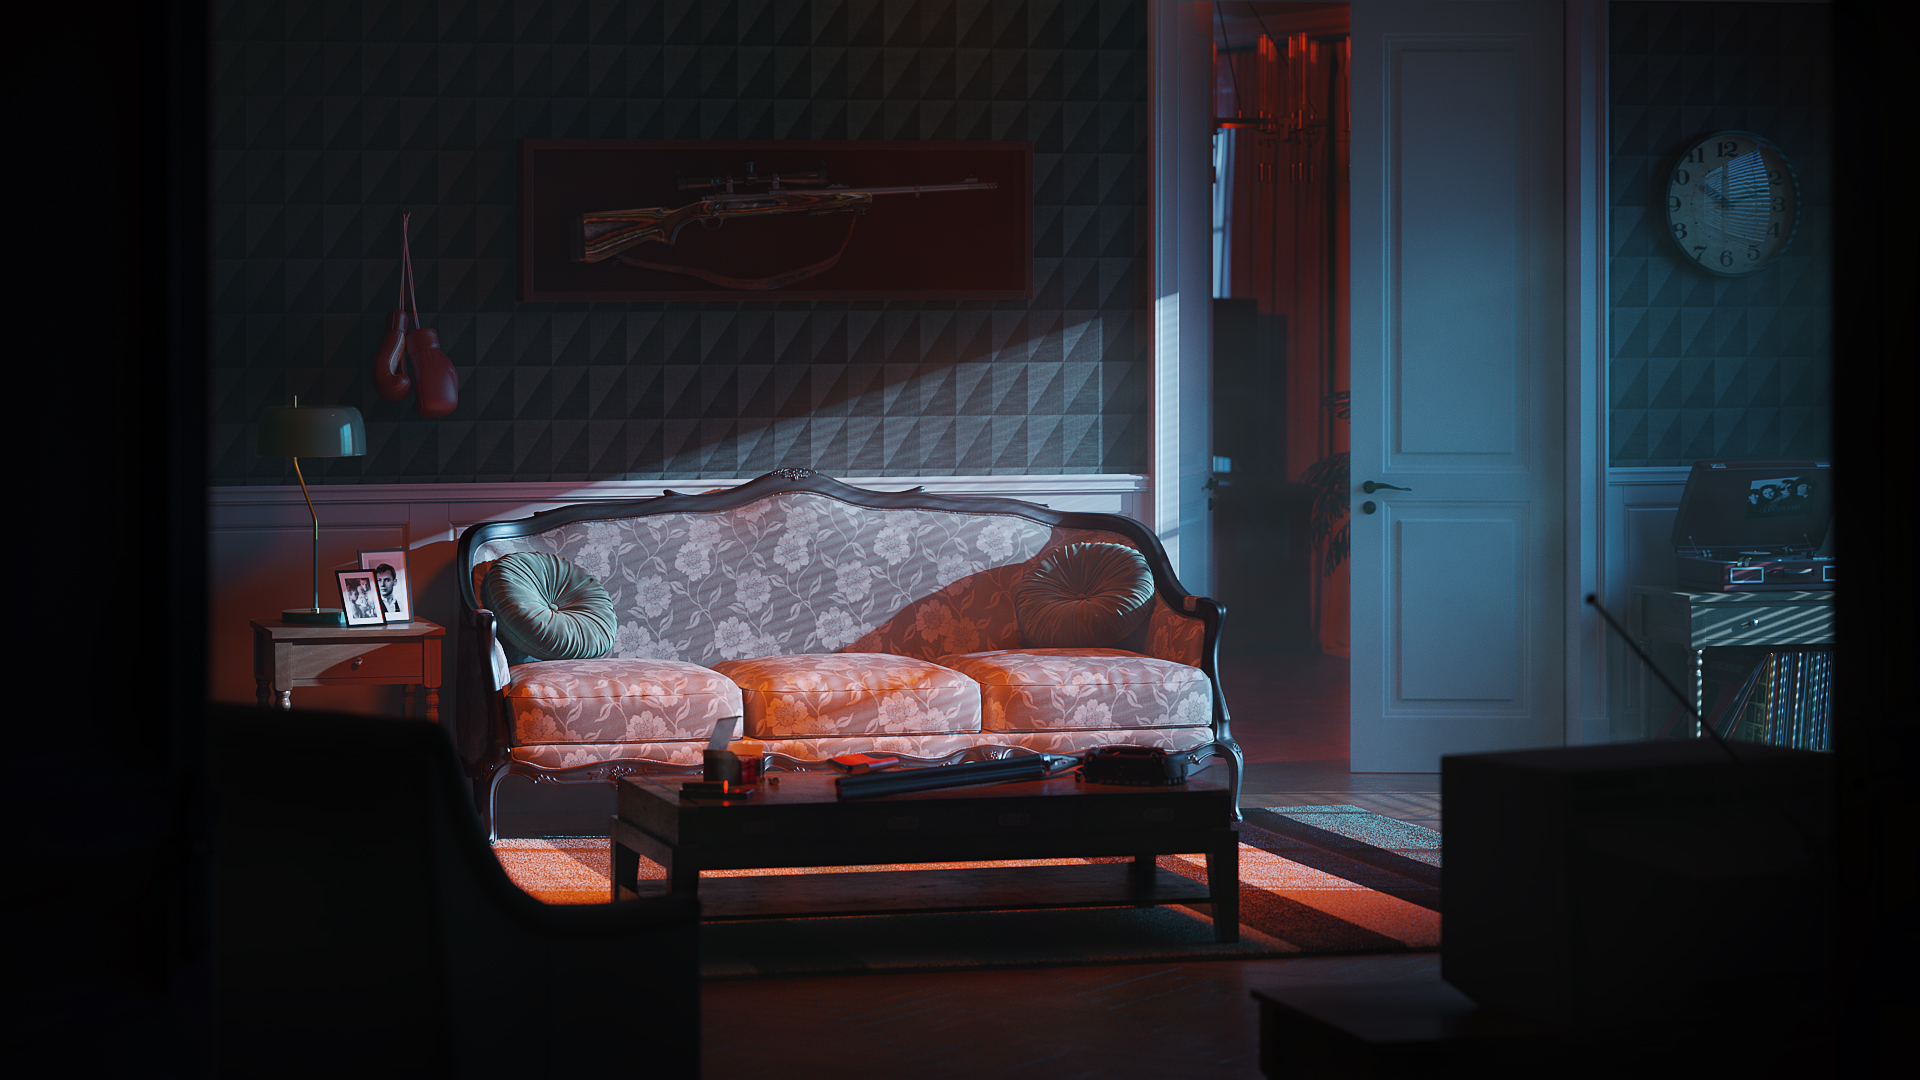 Atmospheric Interior Visualization With a Sofa